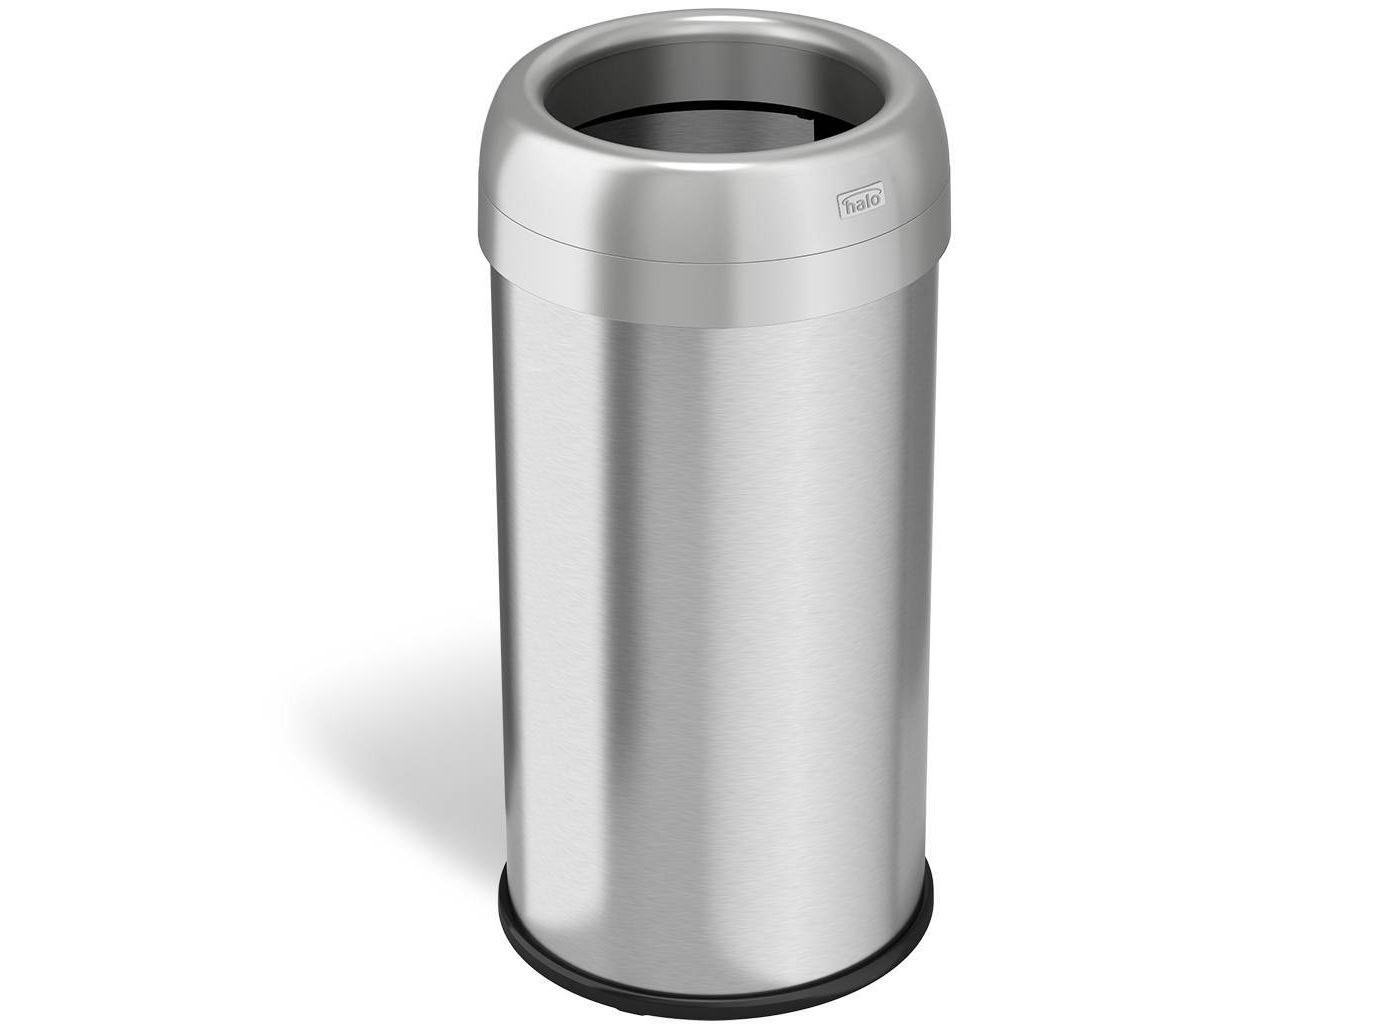 Stainless steel round deodorizing trash can